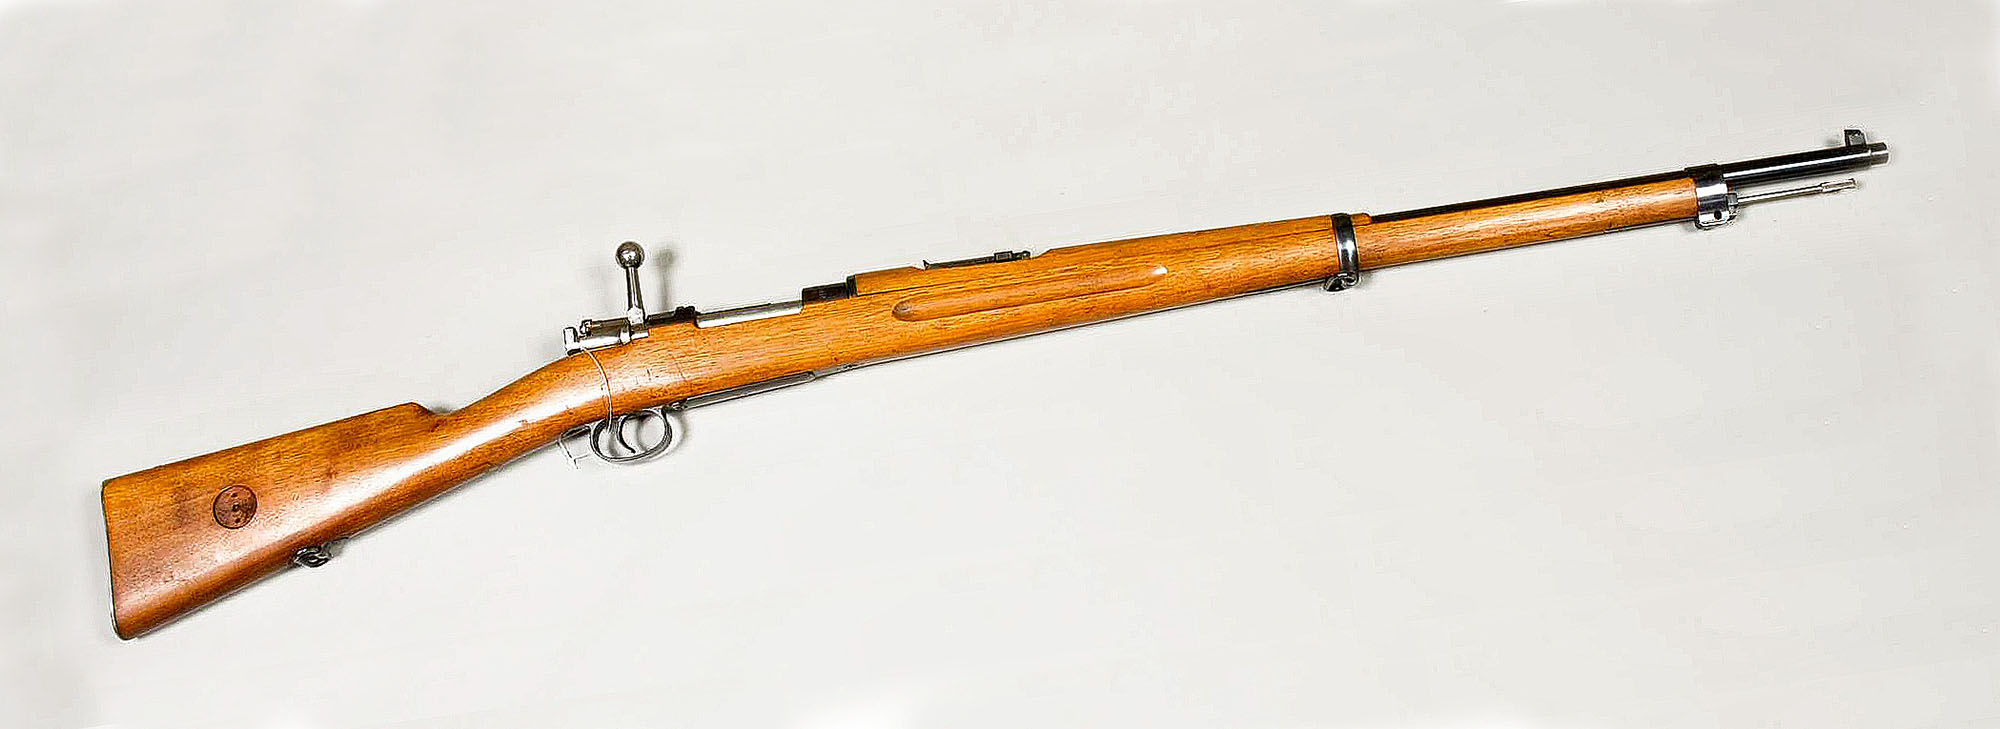 Related image of Best Rifle Scope For 6 5 X55 Swedish Mauser.